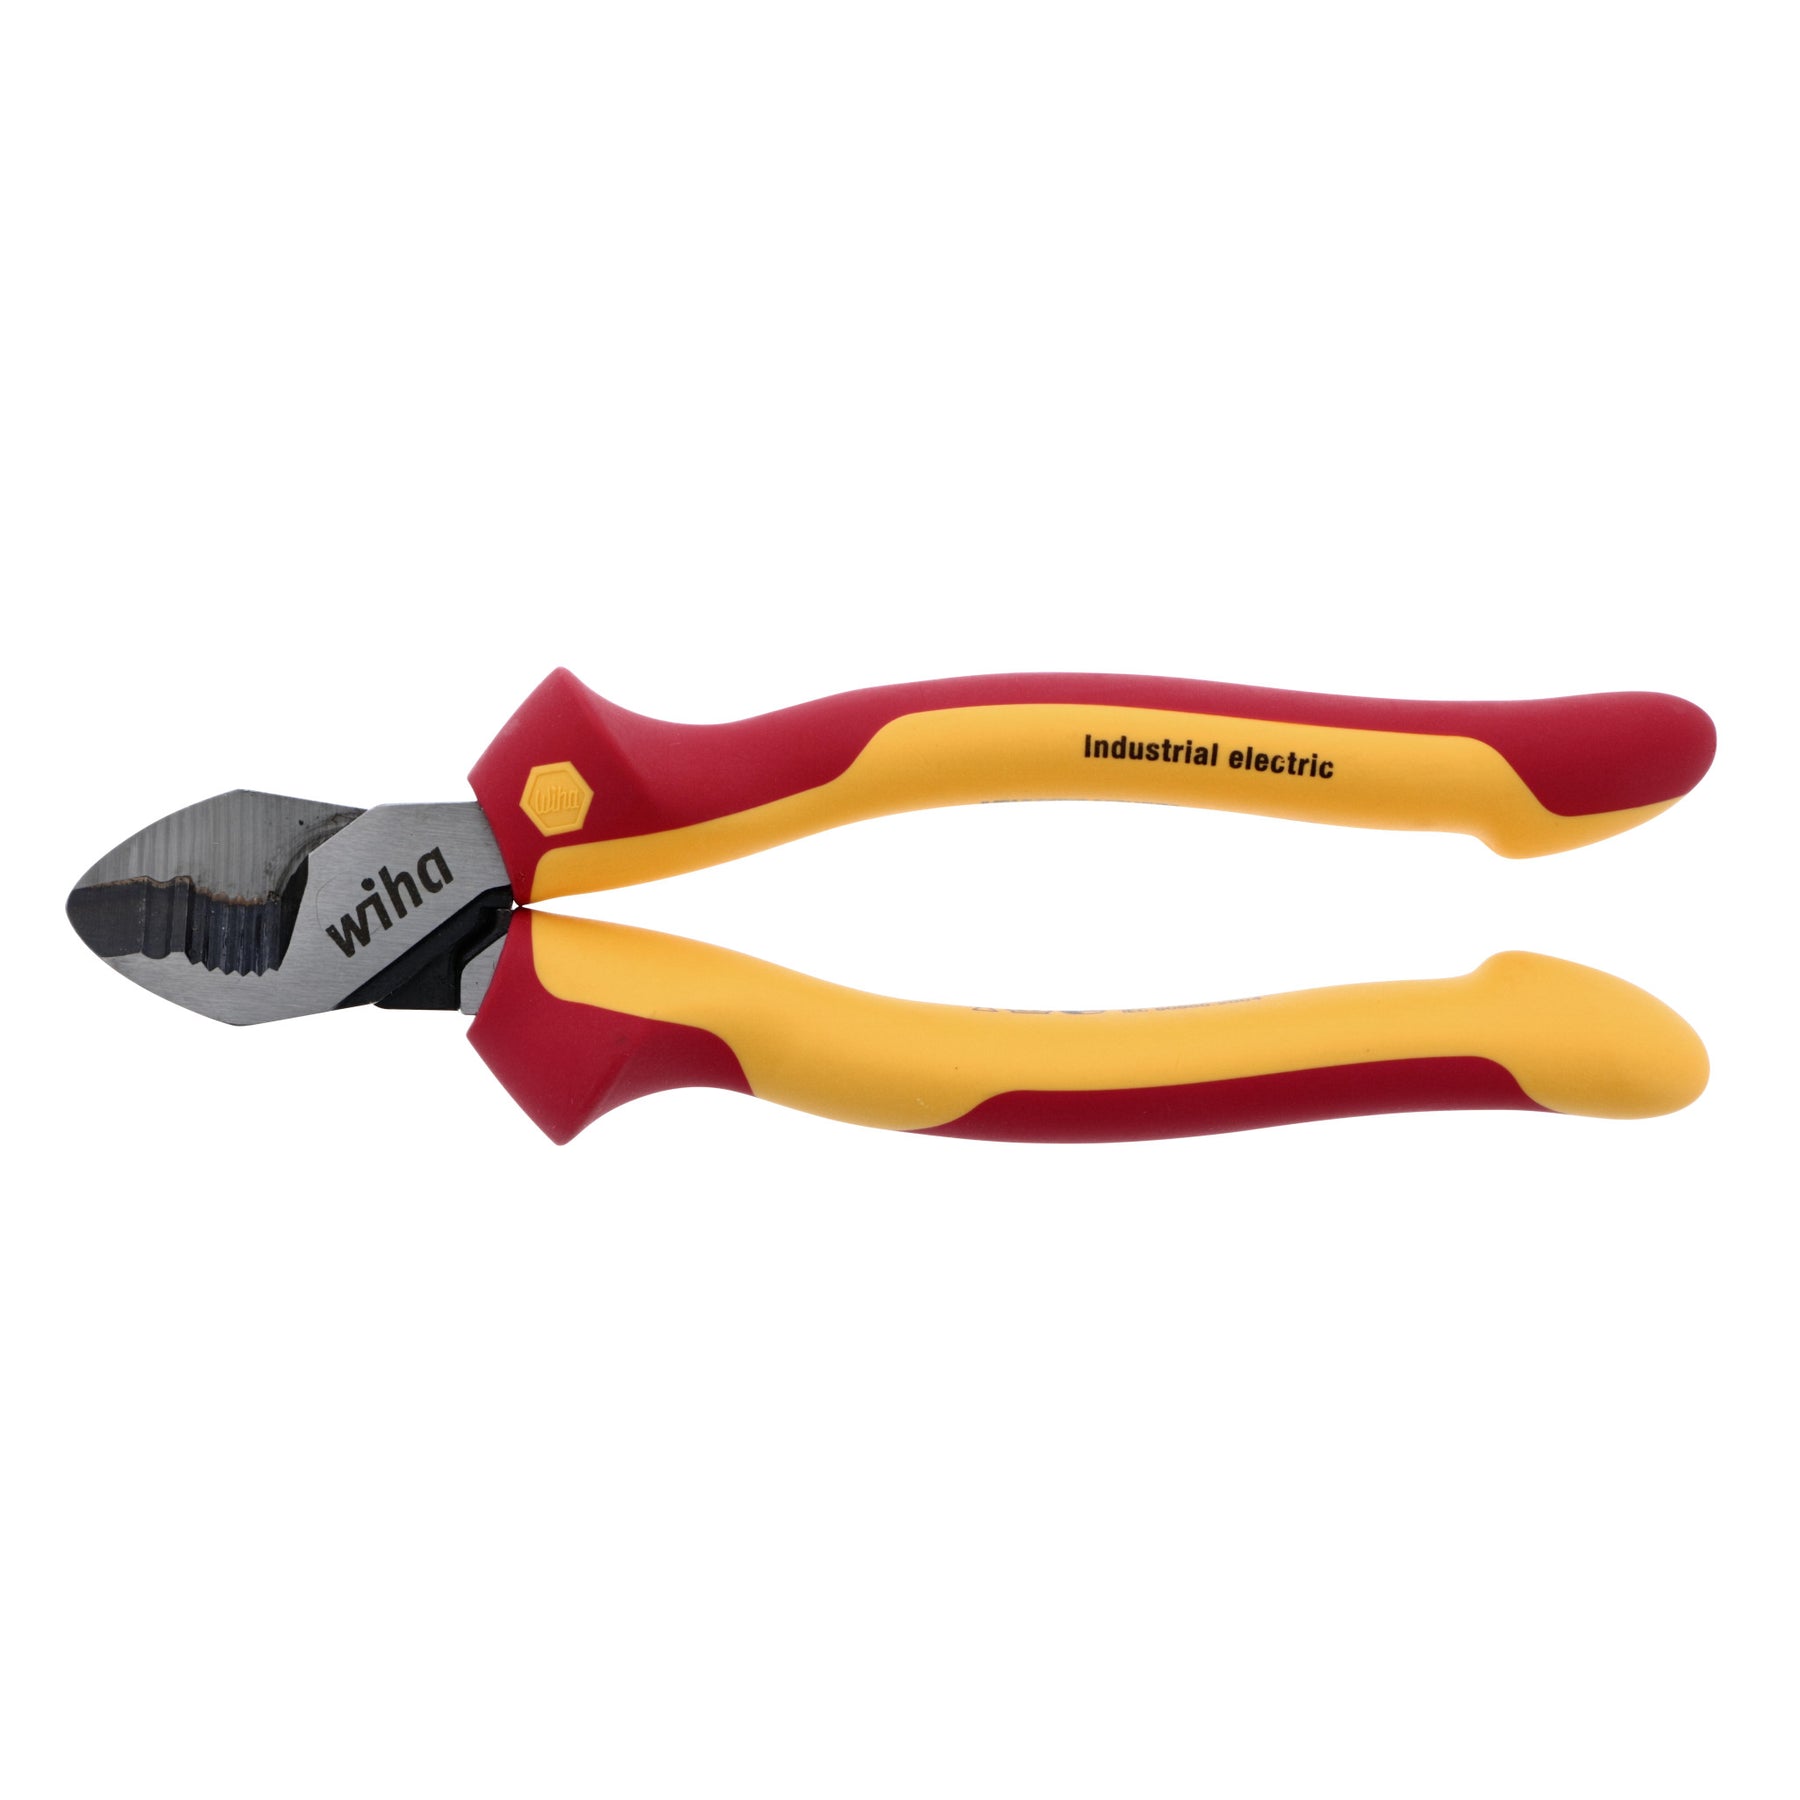 Wiha 32927 Insulated Industrial Cable Cutters 8.0"